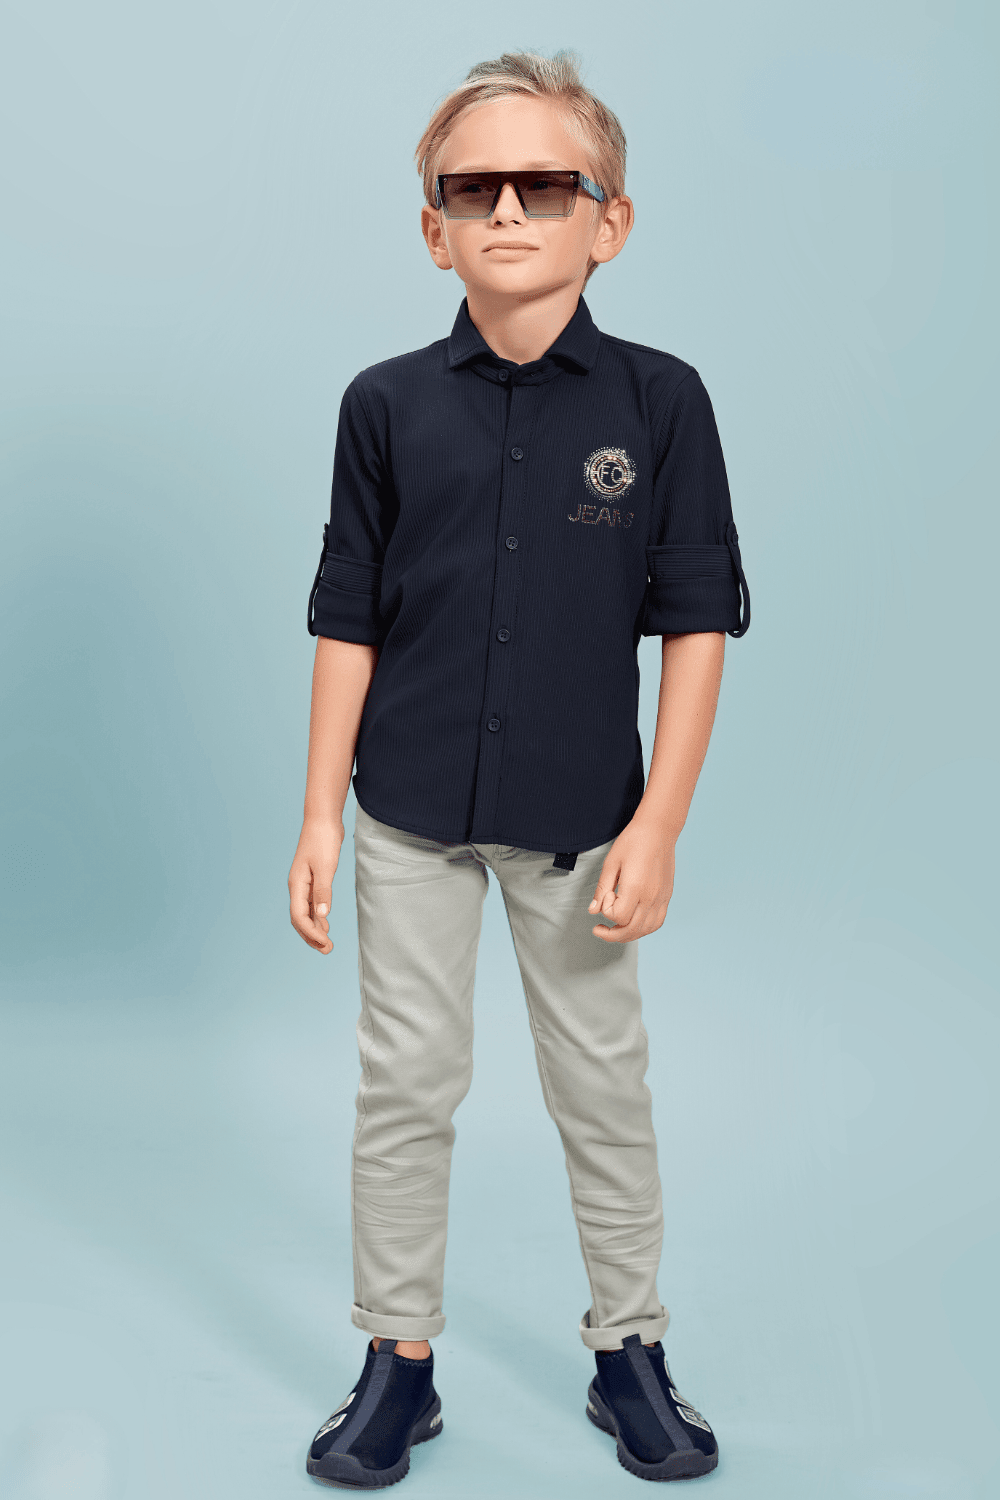 Navy Blue with Grey Casual wear Pant and Shirt Set for Boys - Seasons Chennai